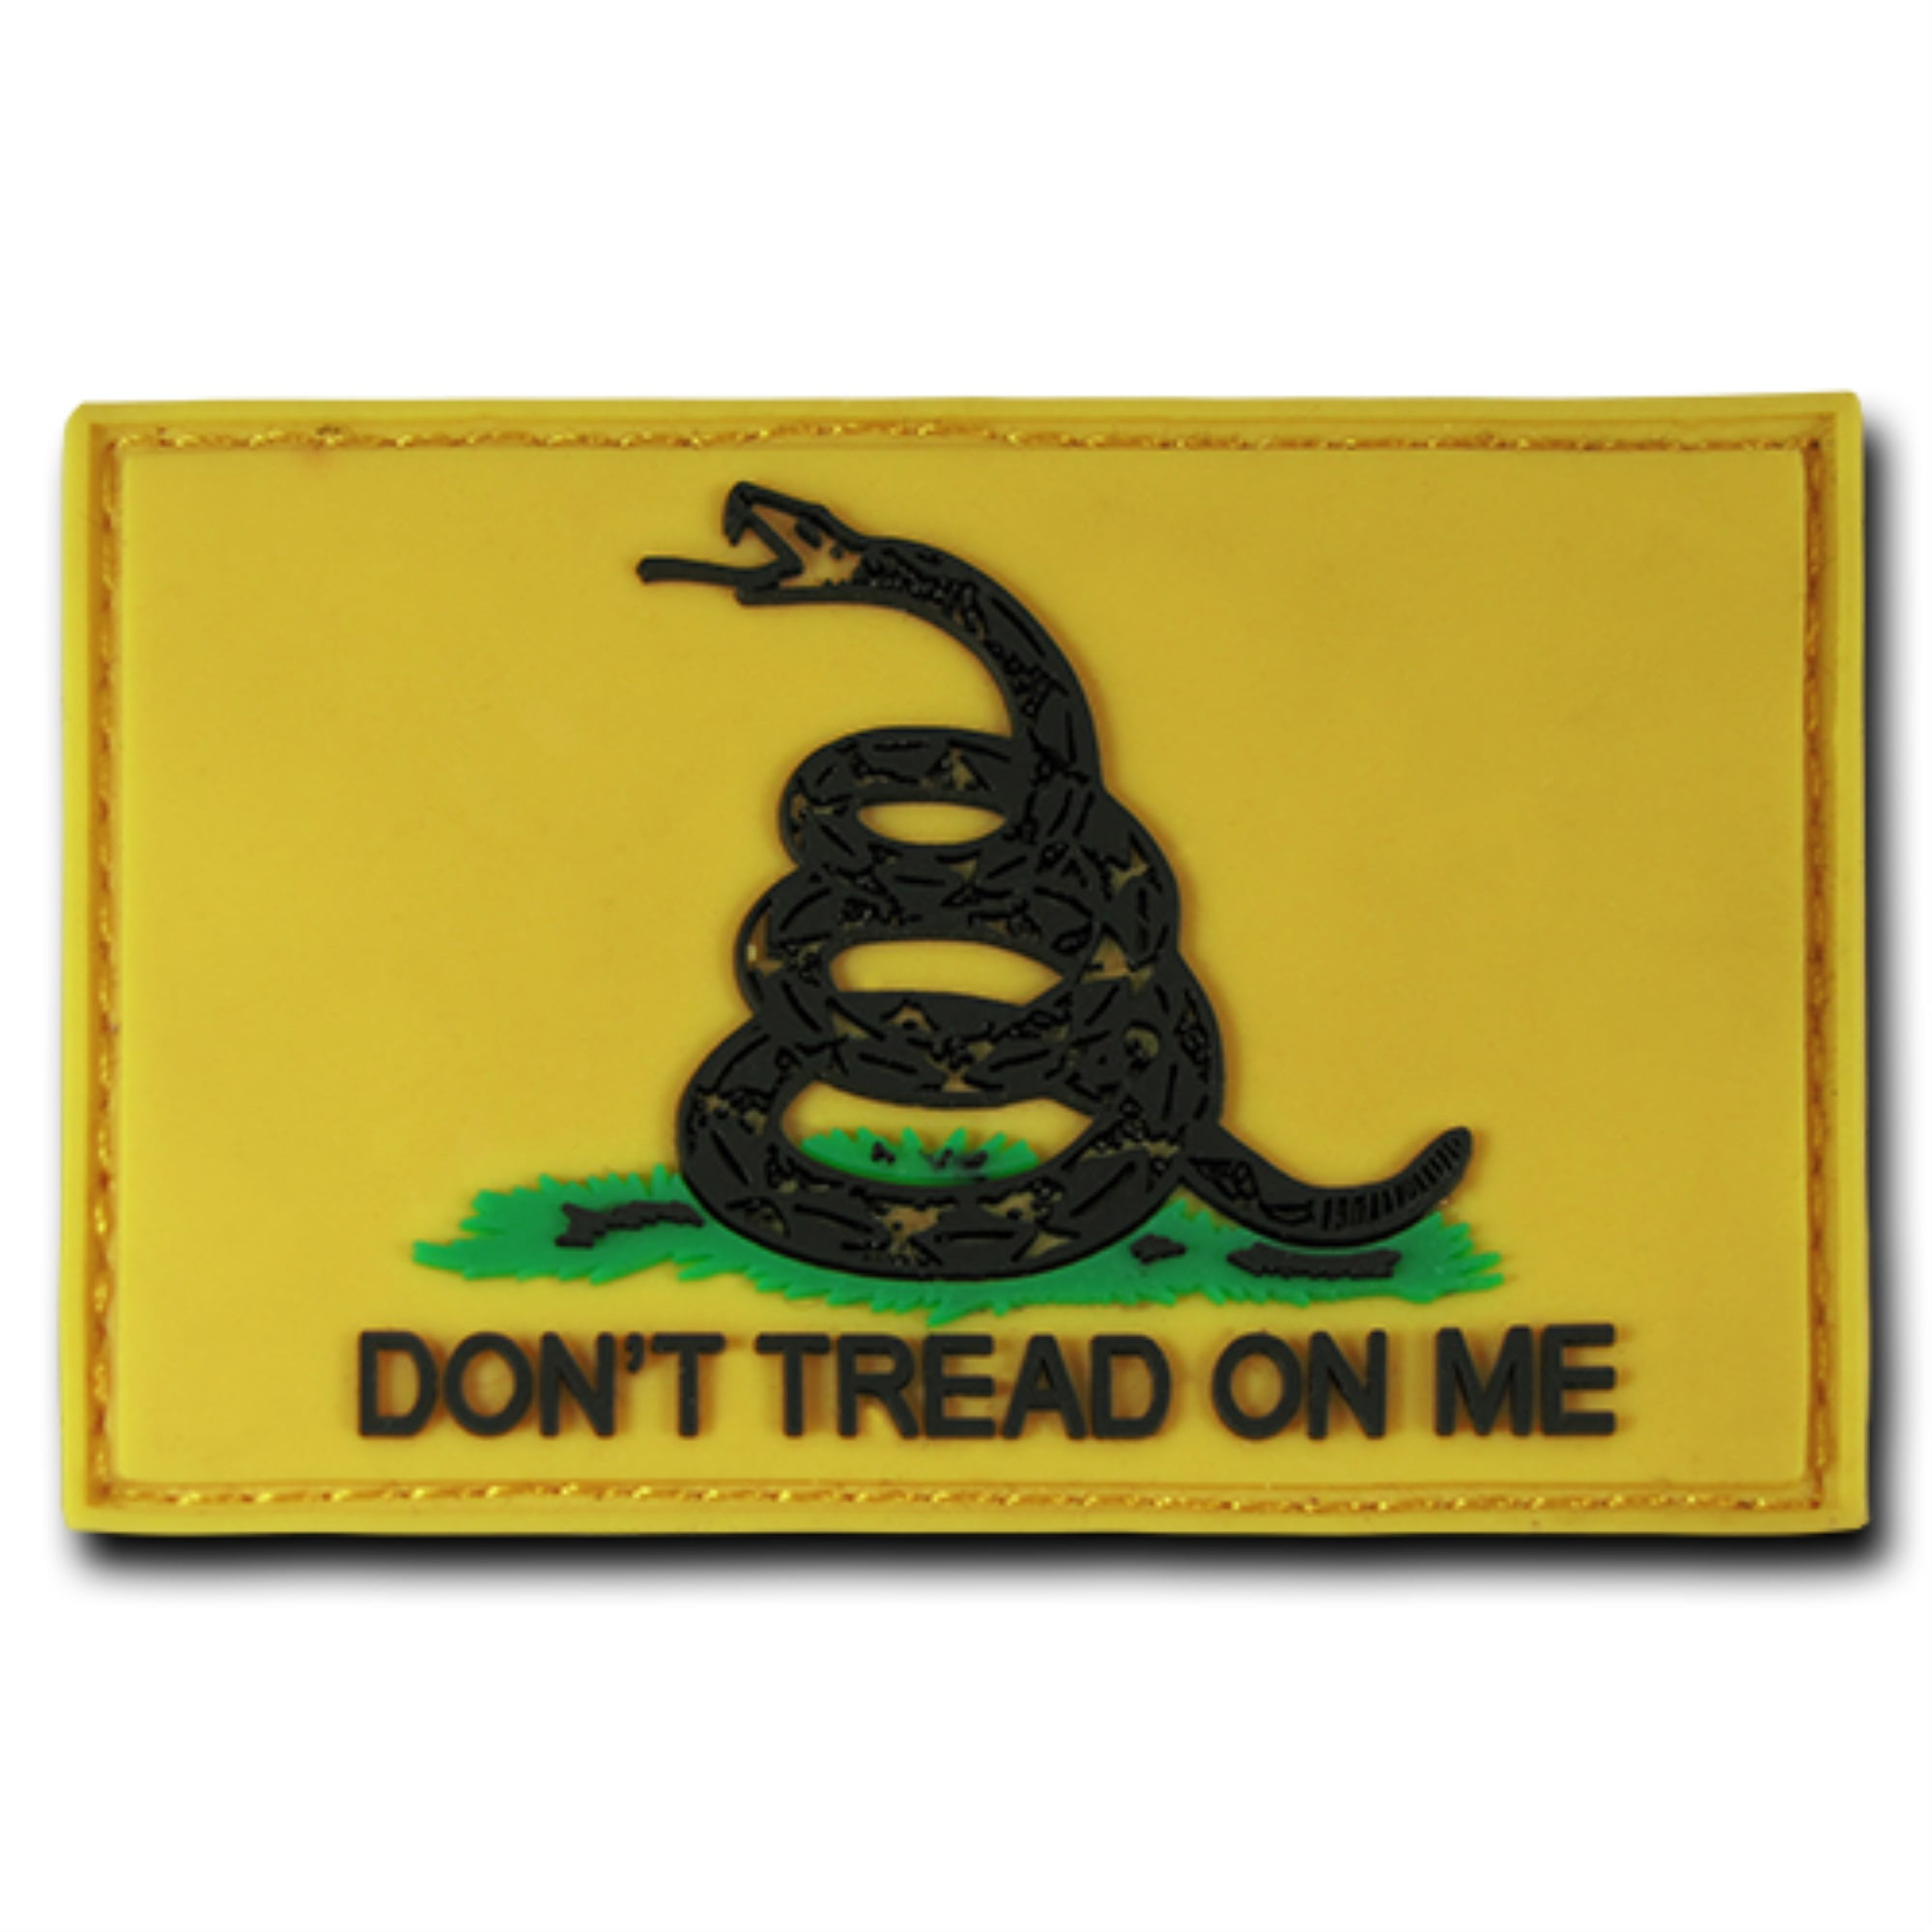 Rapid Dominance T90-GDA-GLD 3 x 2 in. Rubber Patch Gadsden Flag, Gold